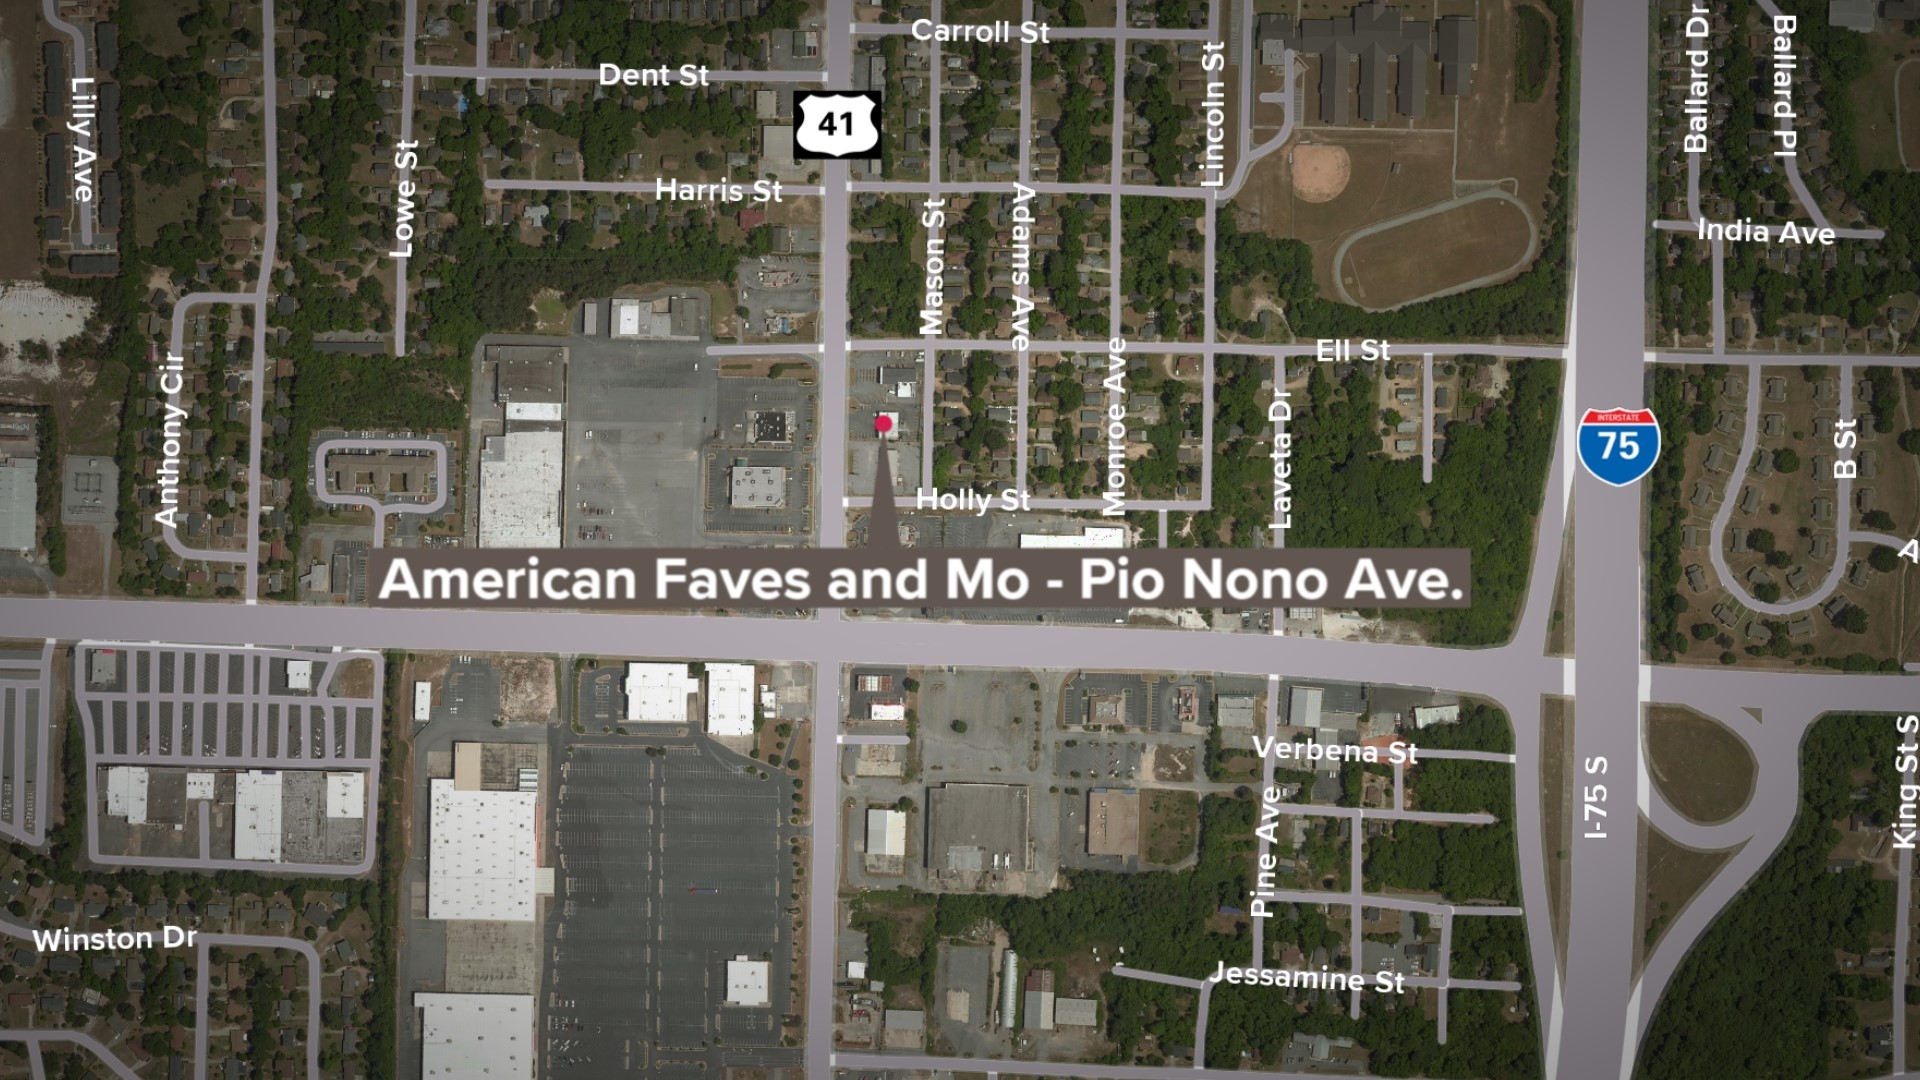 It happened around 10:15 p.m. at the American Faves and Mo on Pio Nono Avenue.